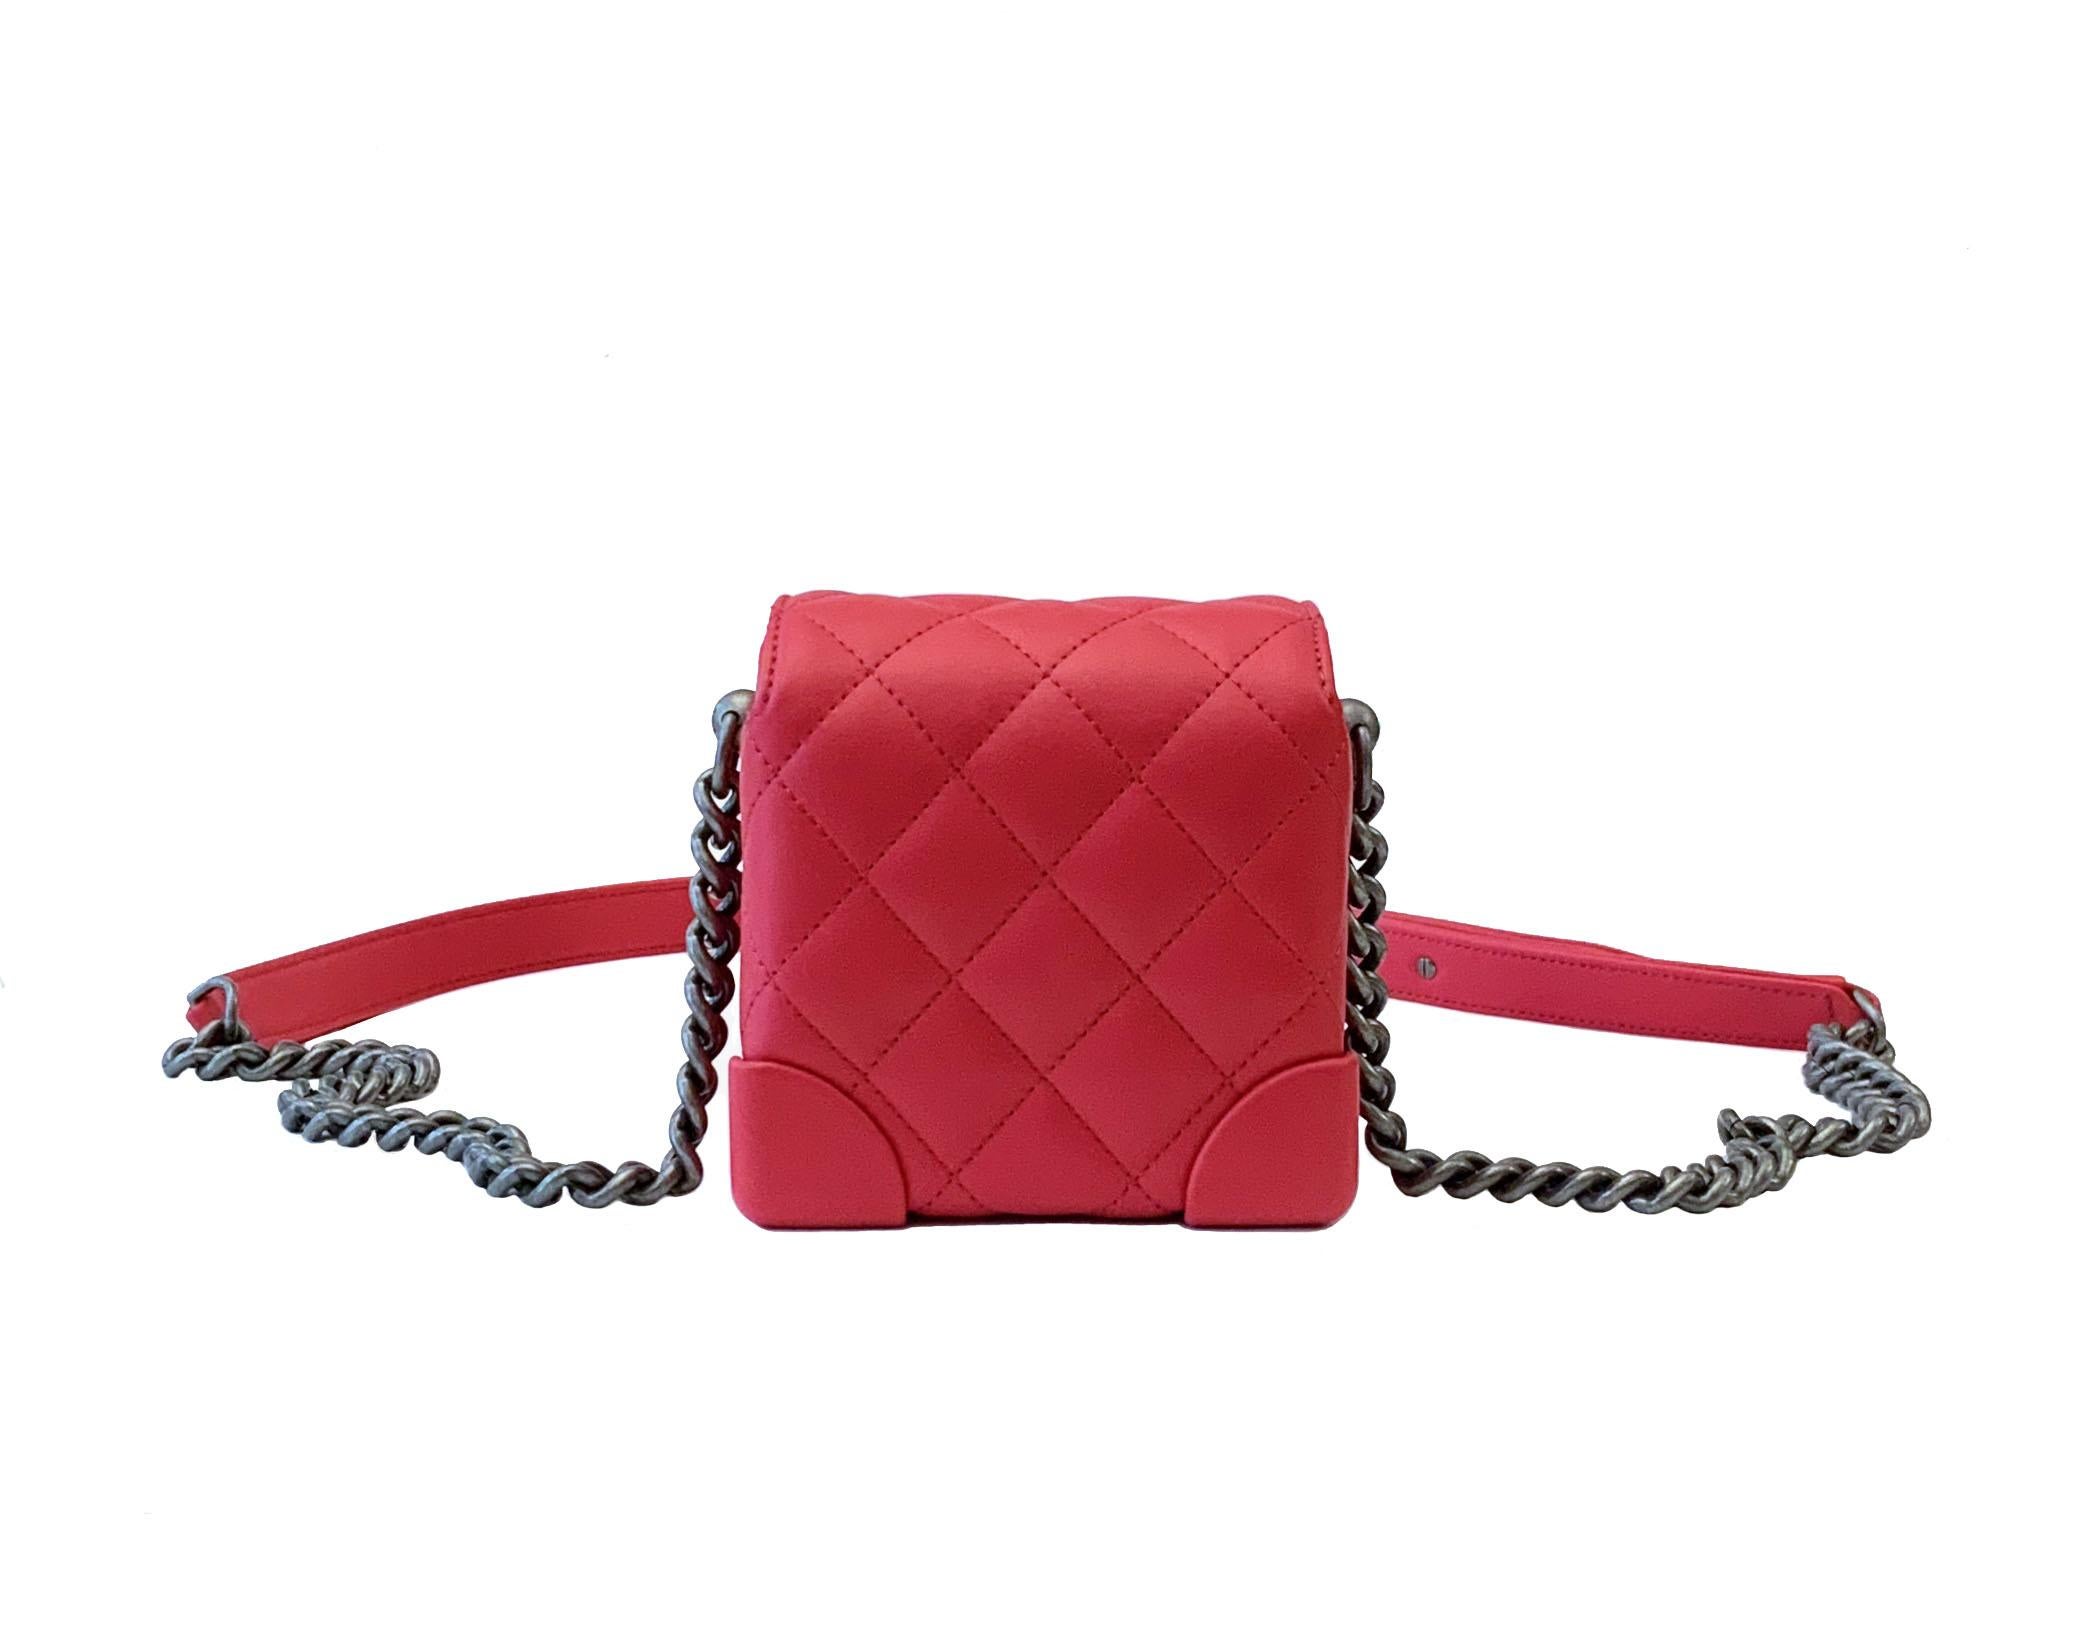 Exclusive and rare, this trunk-like style shoulder bag is the newest of the family 